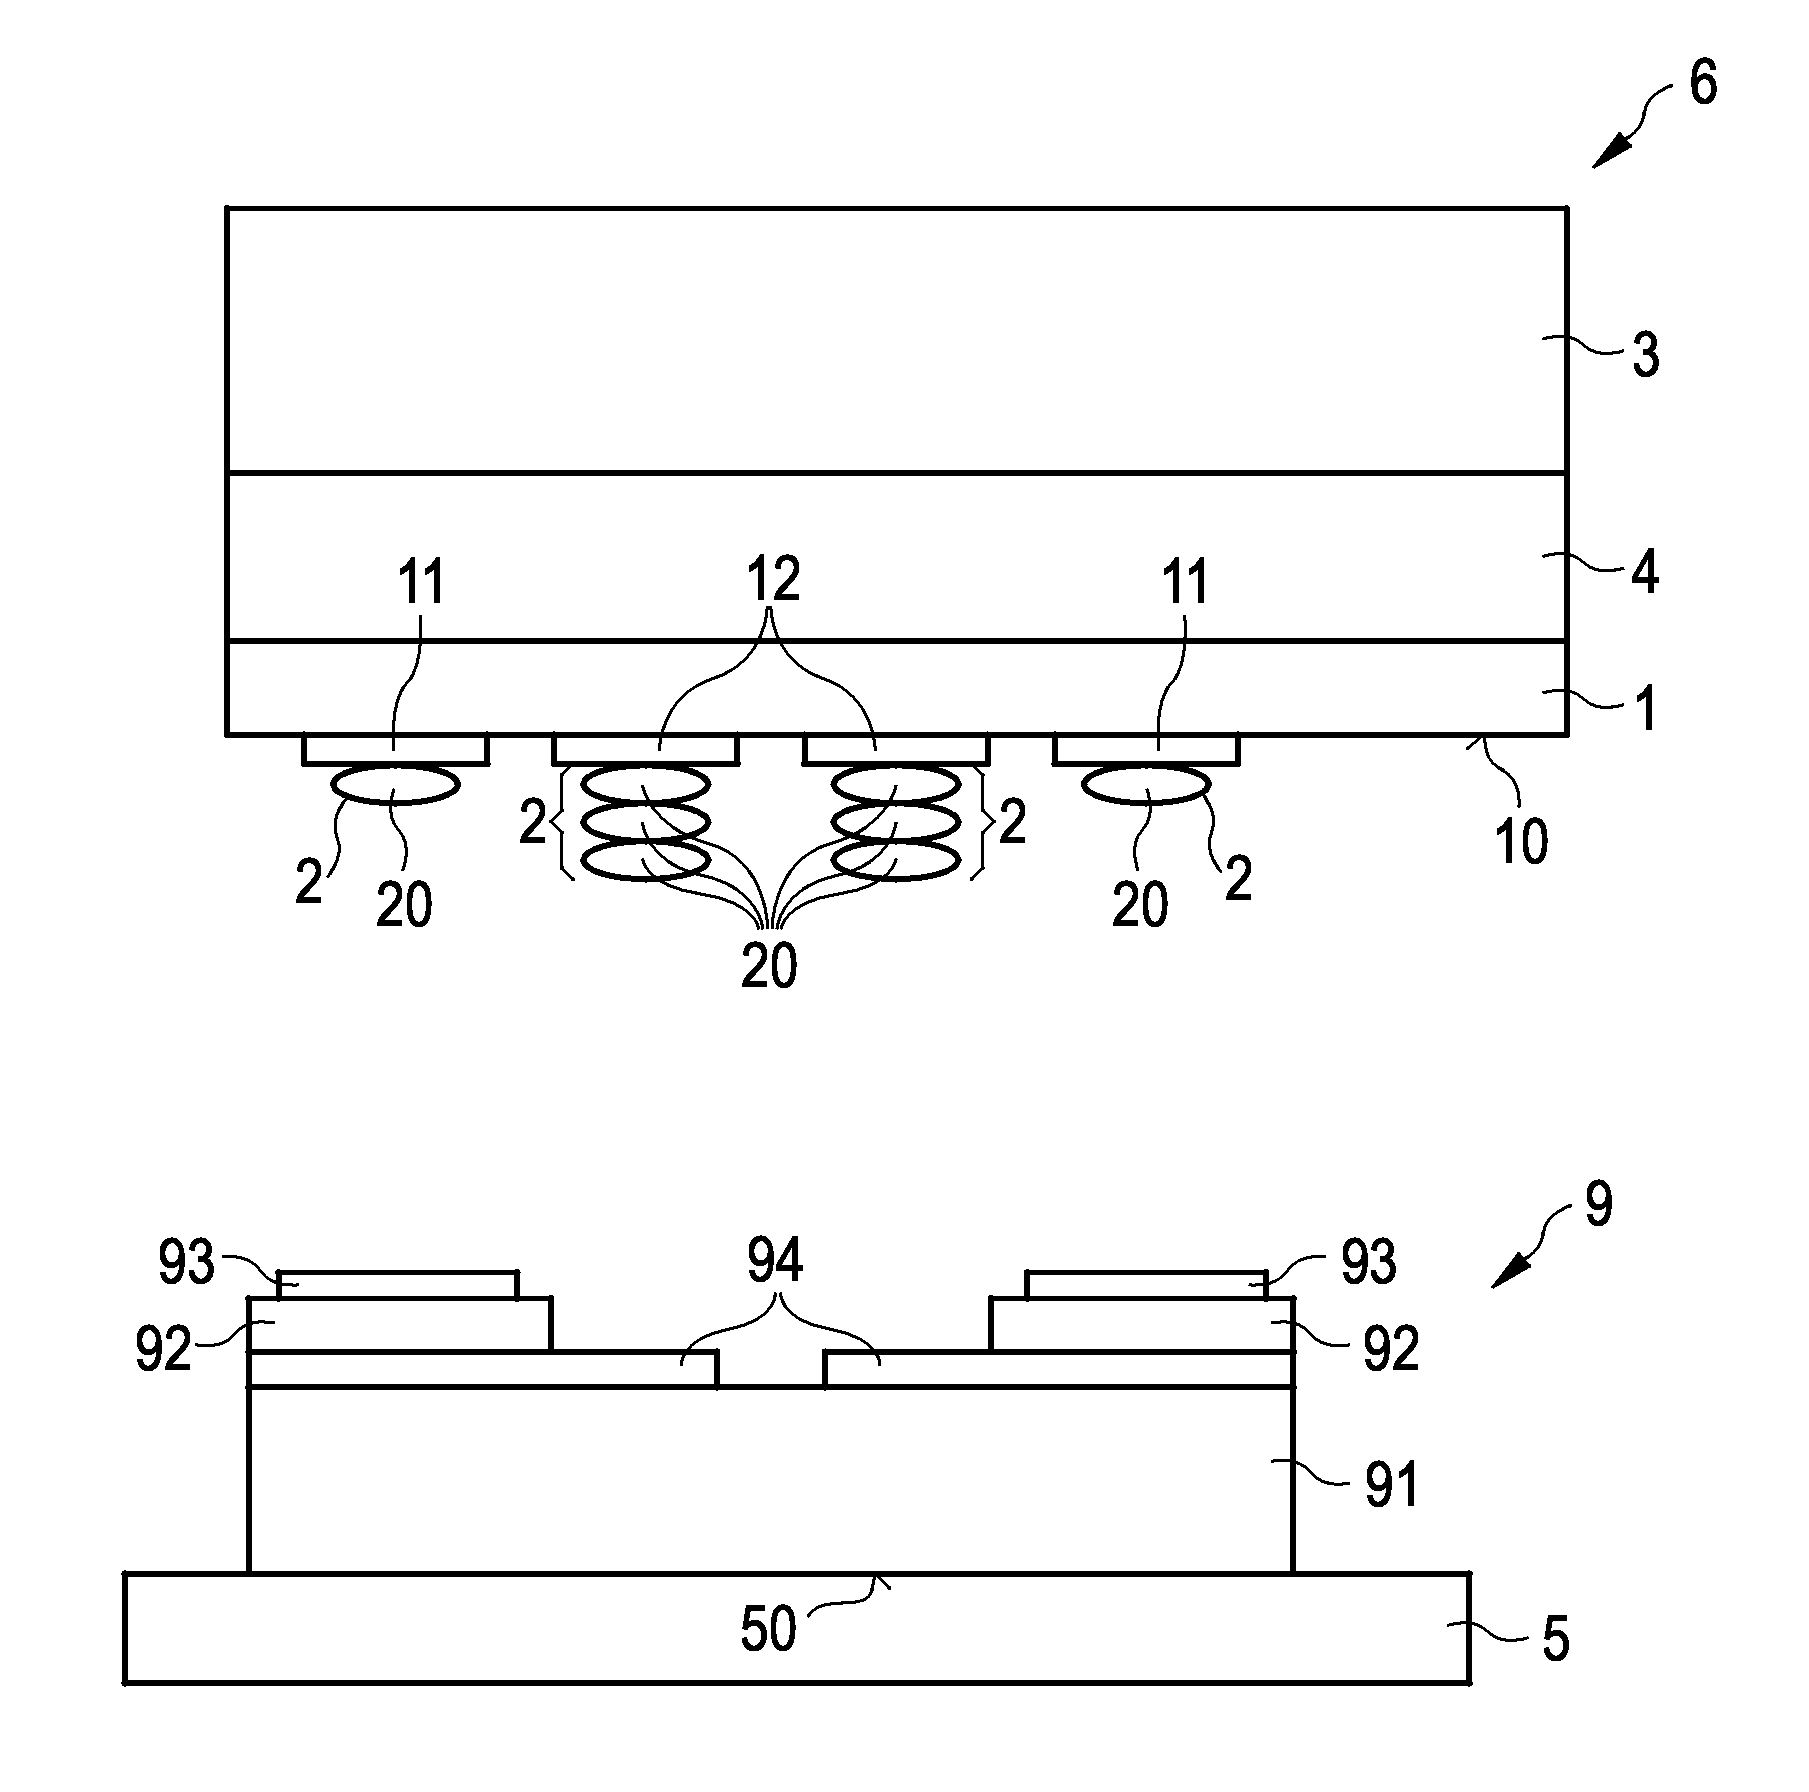 Method for Temporary Electrical Contacting of a Component Arrangement and Apparatus Therefor